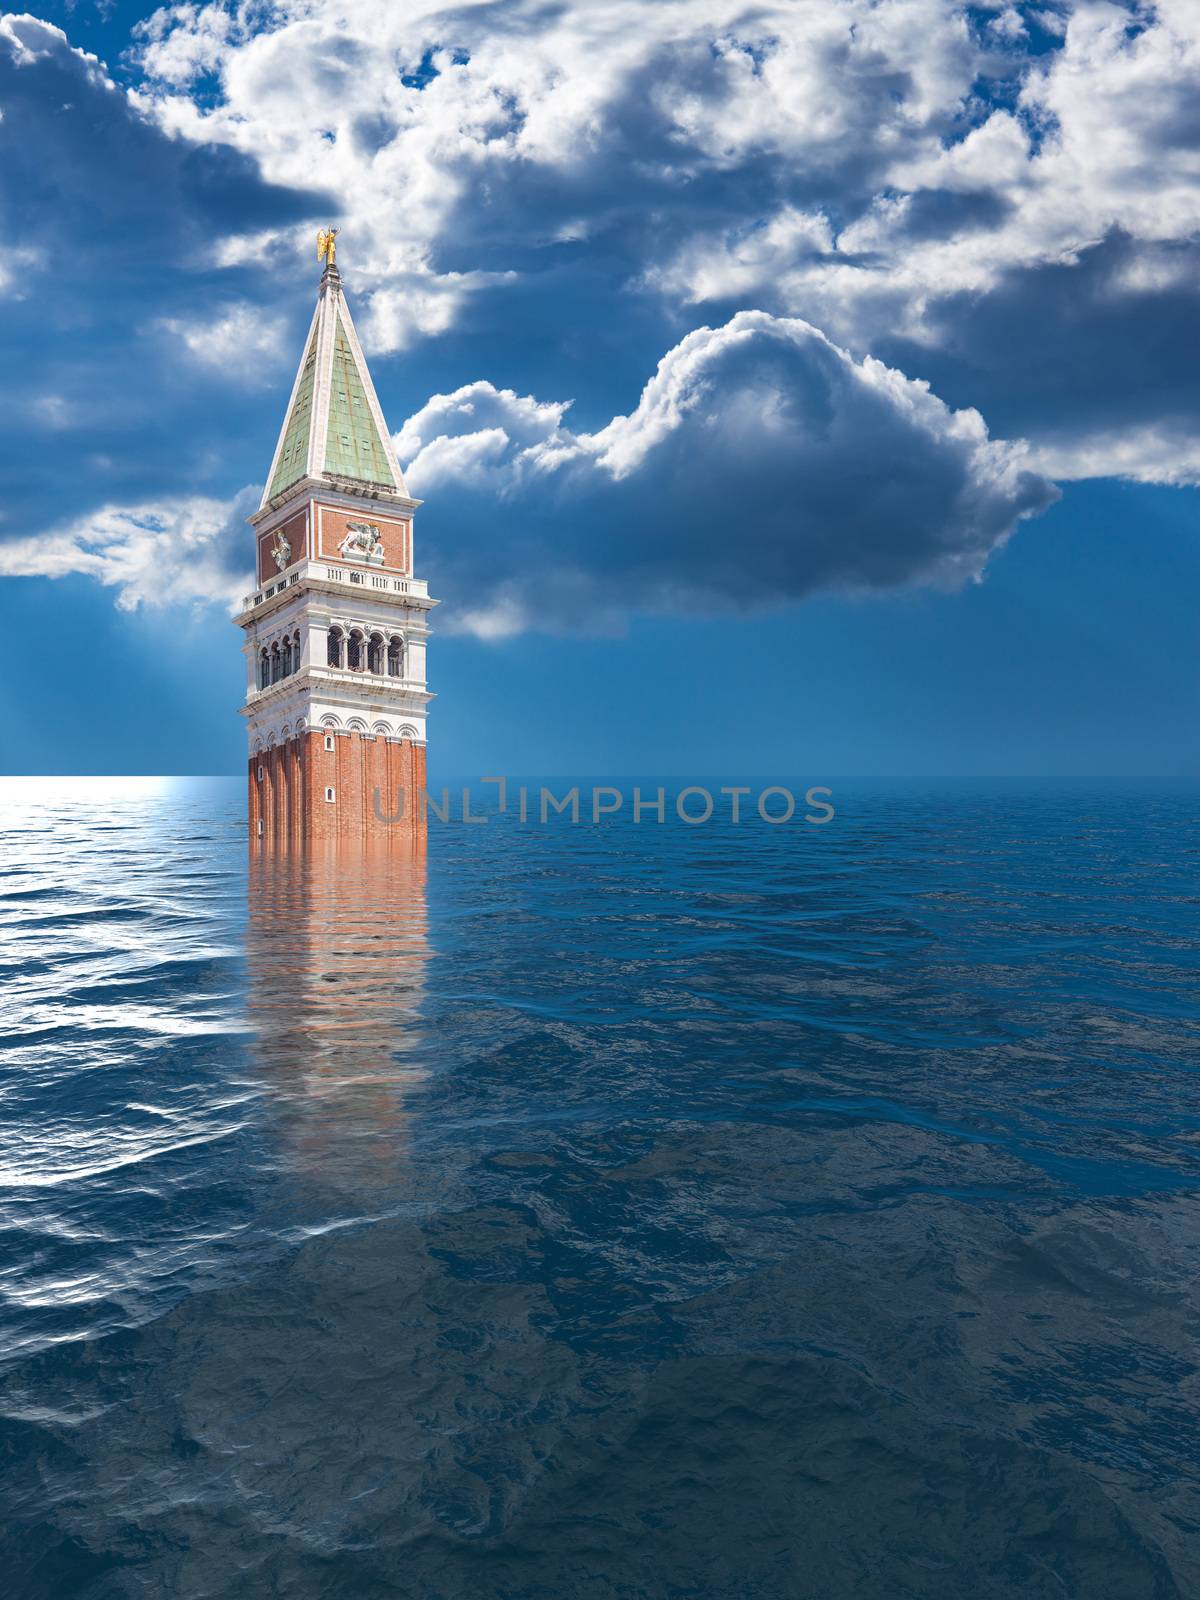 Concept image of a flooded San Marco or St Marks square in Venice as sea level rise makes the city uninhabitable